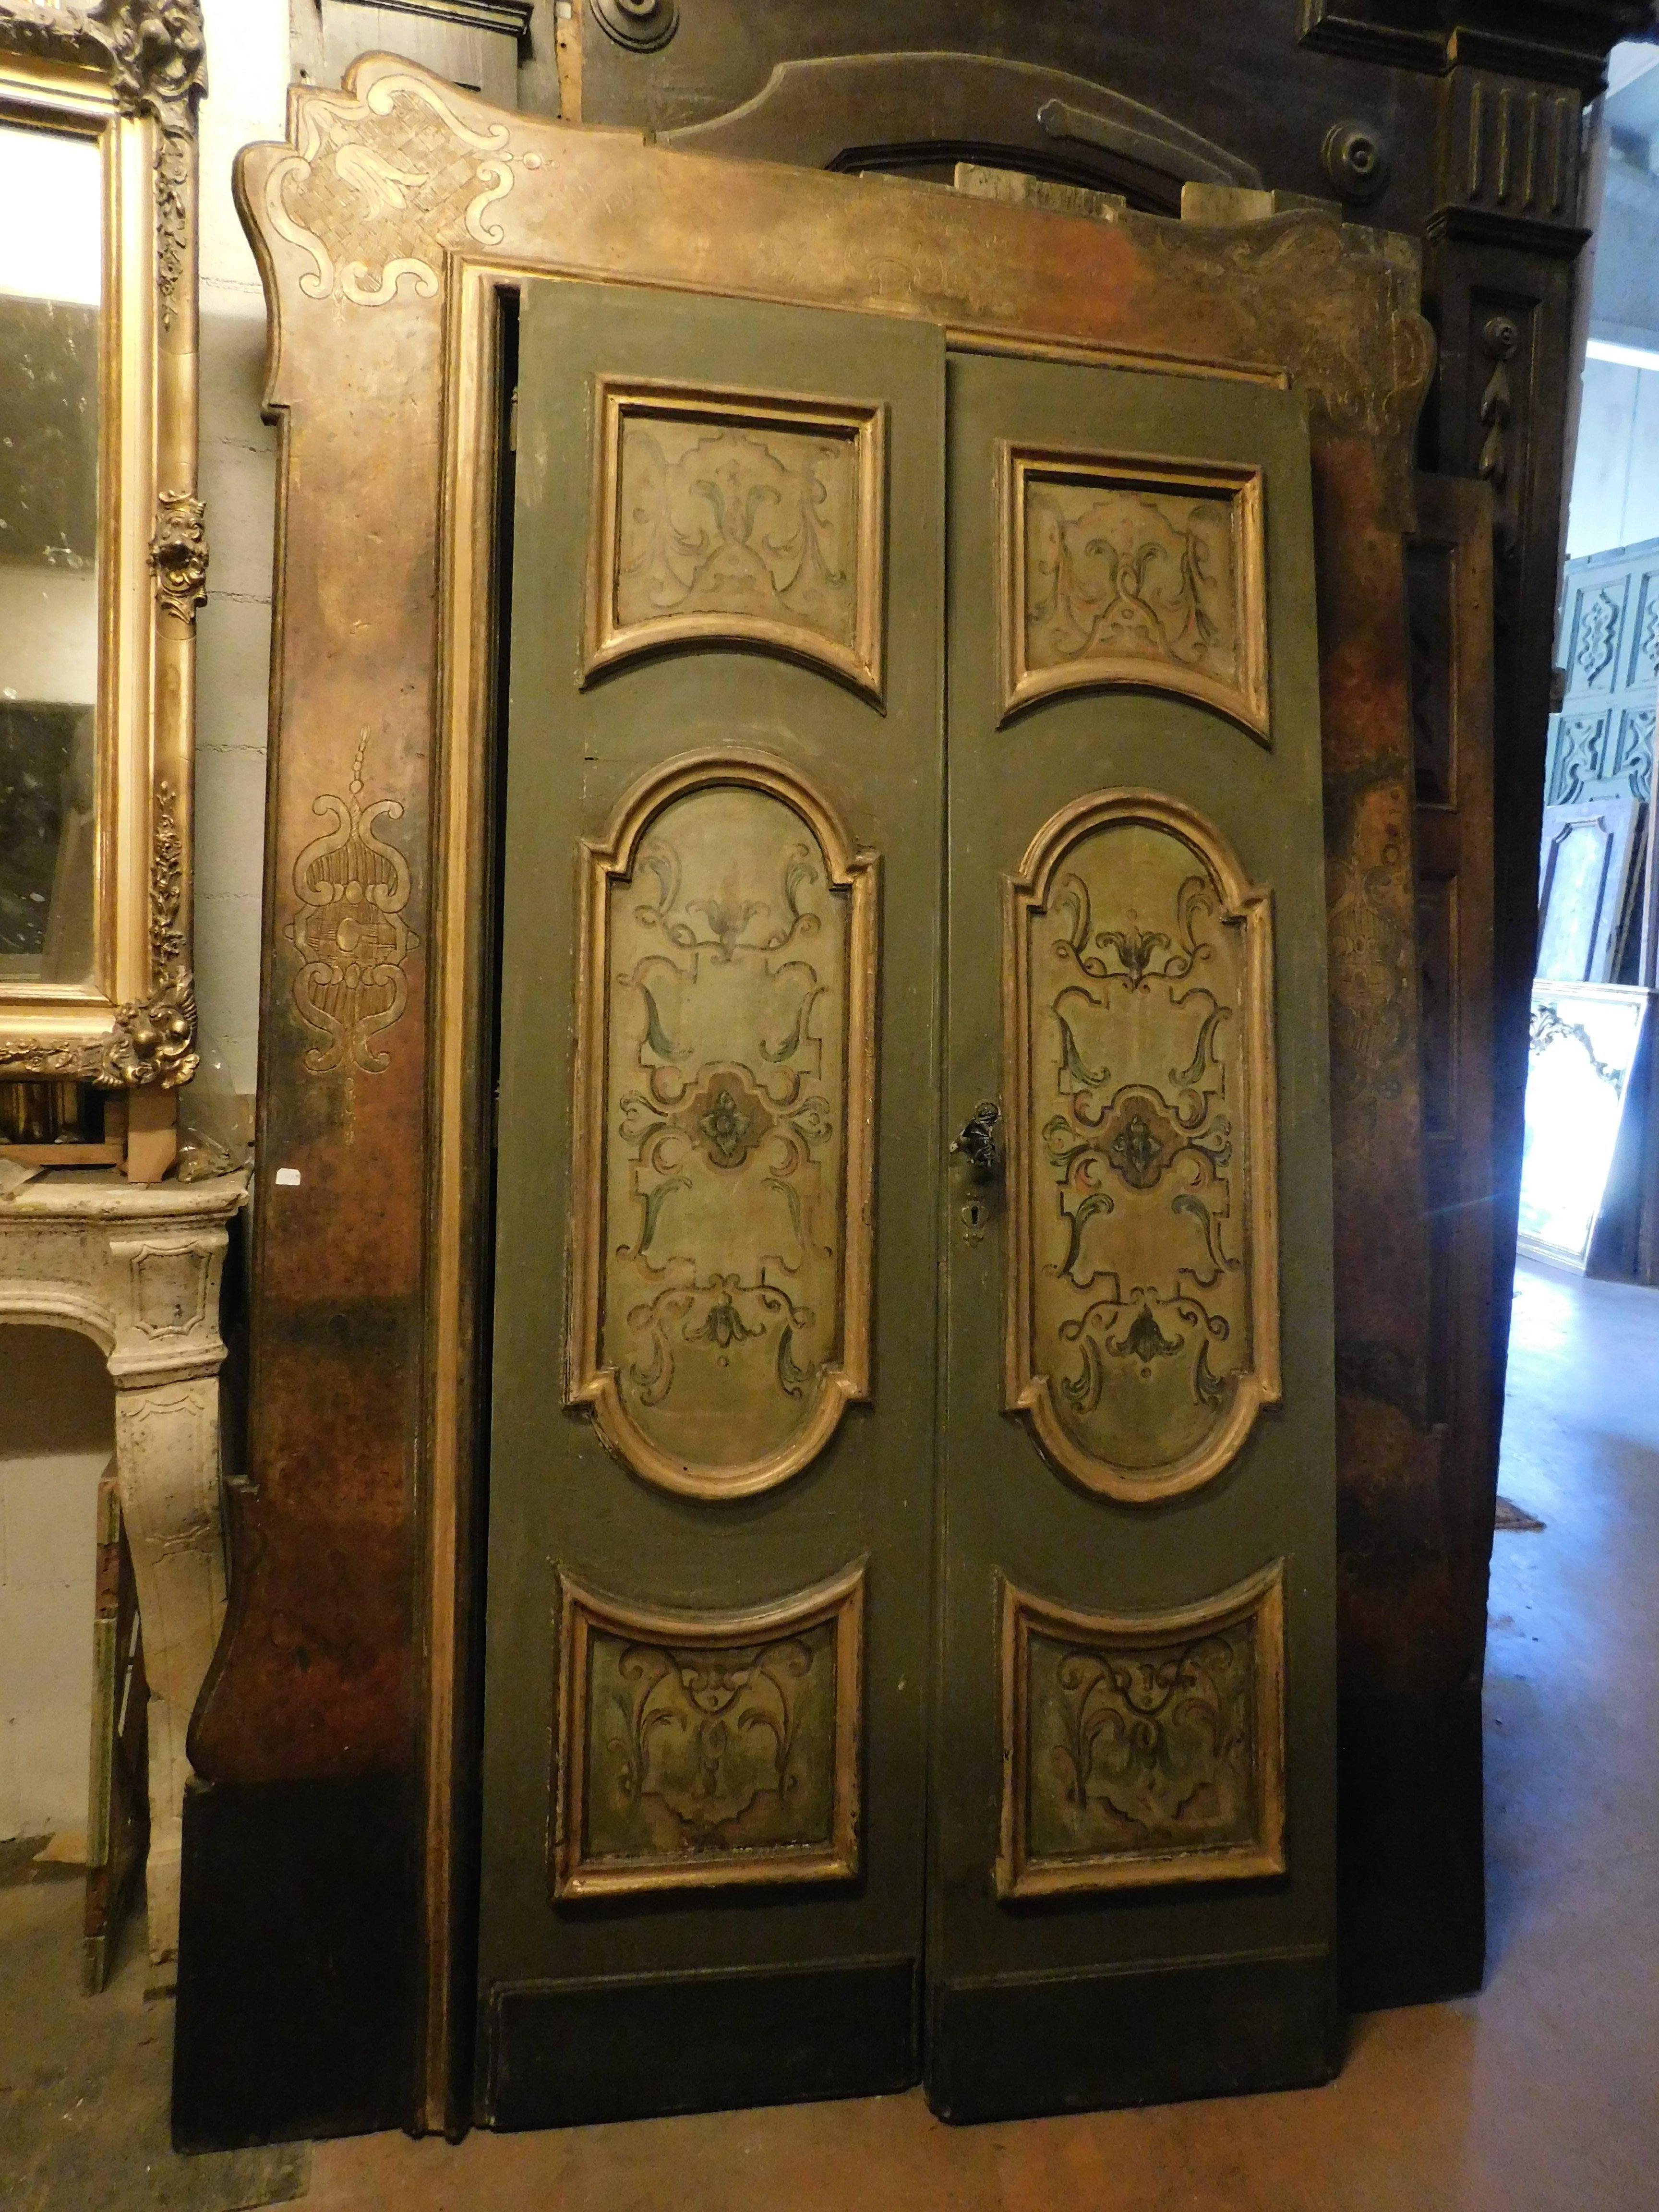 Door in lacquered wood with two doors, carved panels and with floral paintings. Complete with wavy frame with painted and sculpted decorations. Door from 18th century Italy. Suggestive and intriguing, it makes any entrance or passage between rooms